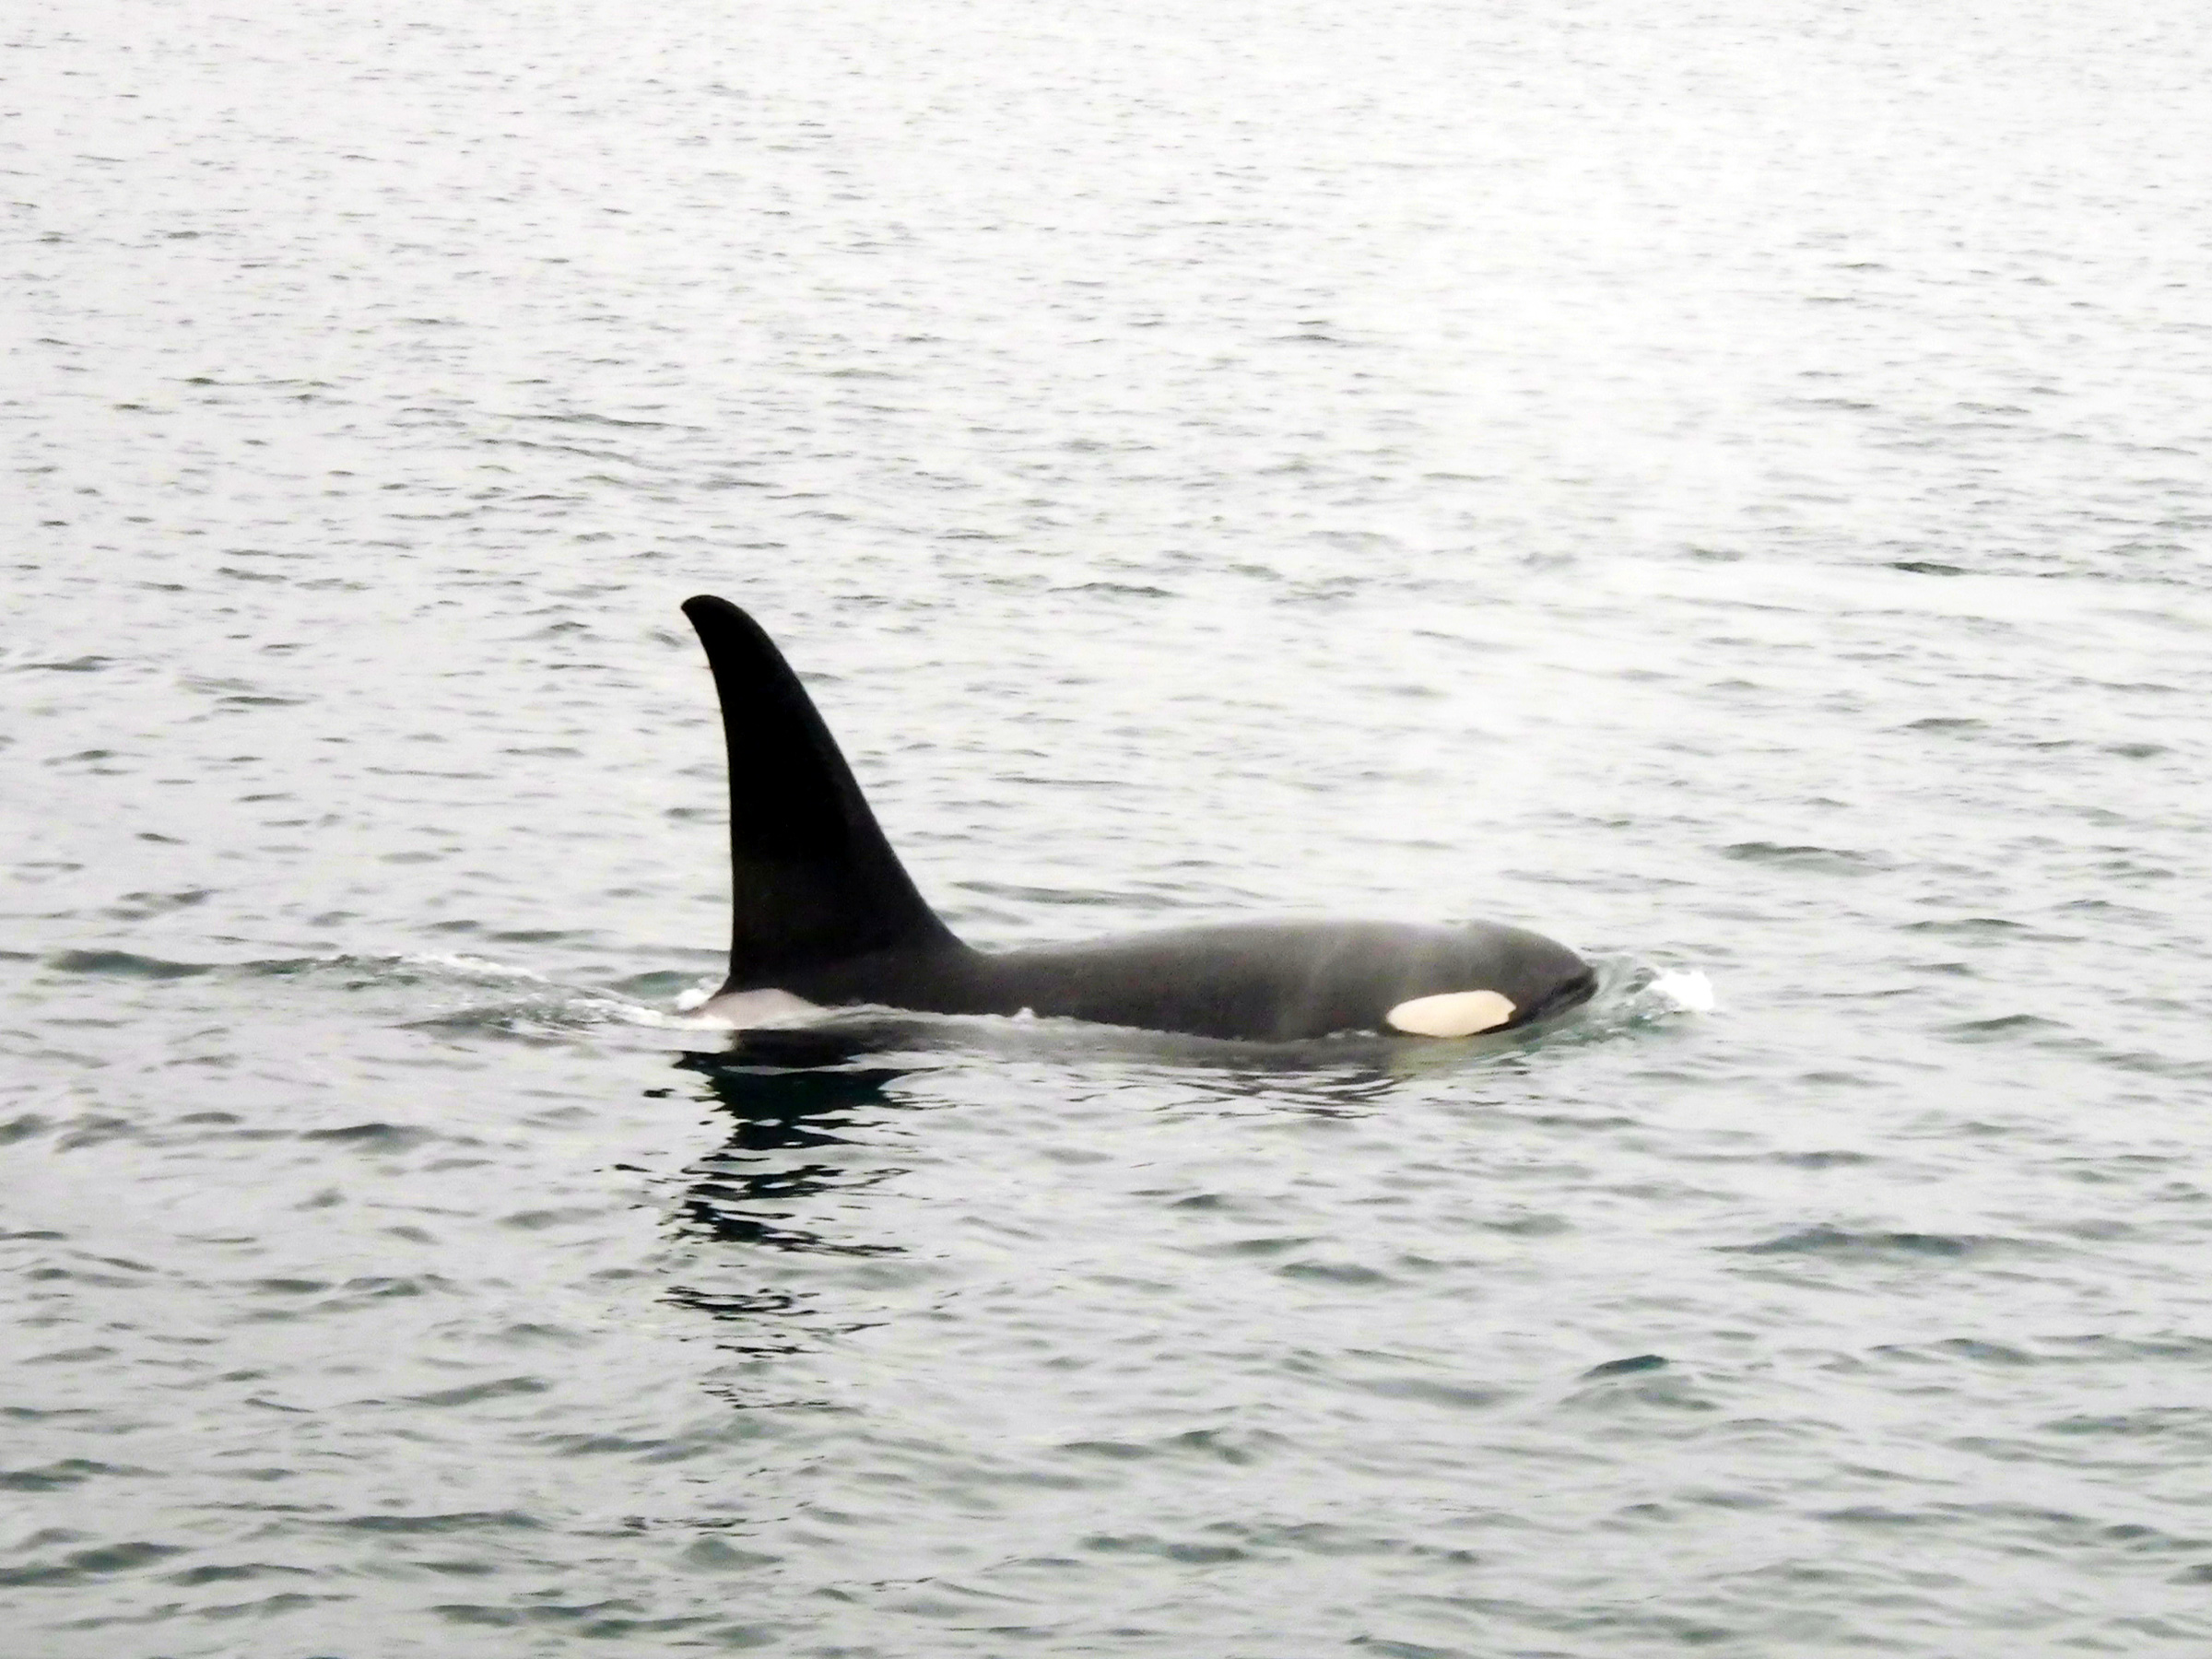 Puget Sound Orca Whales